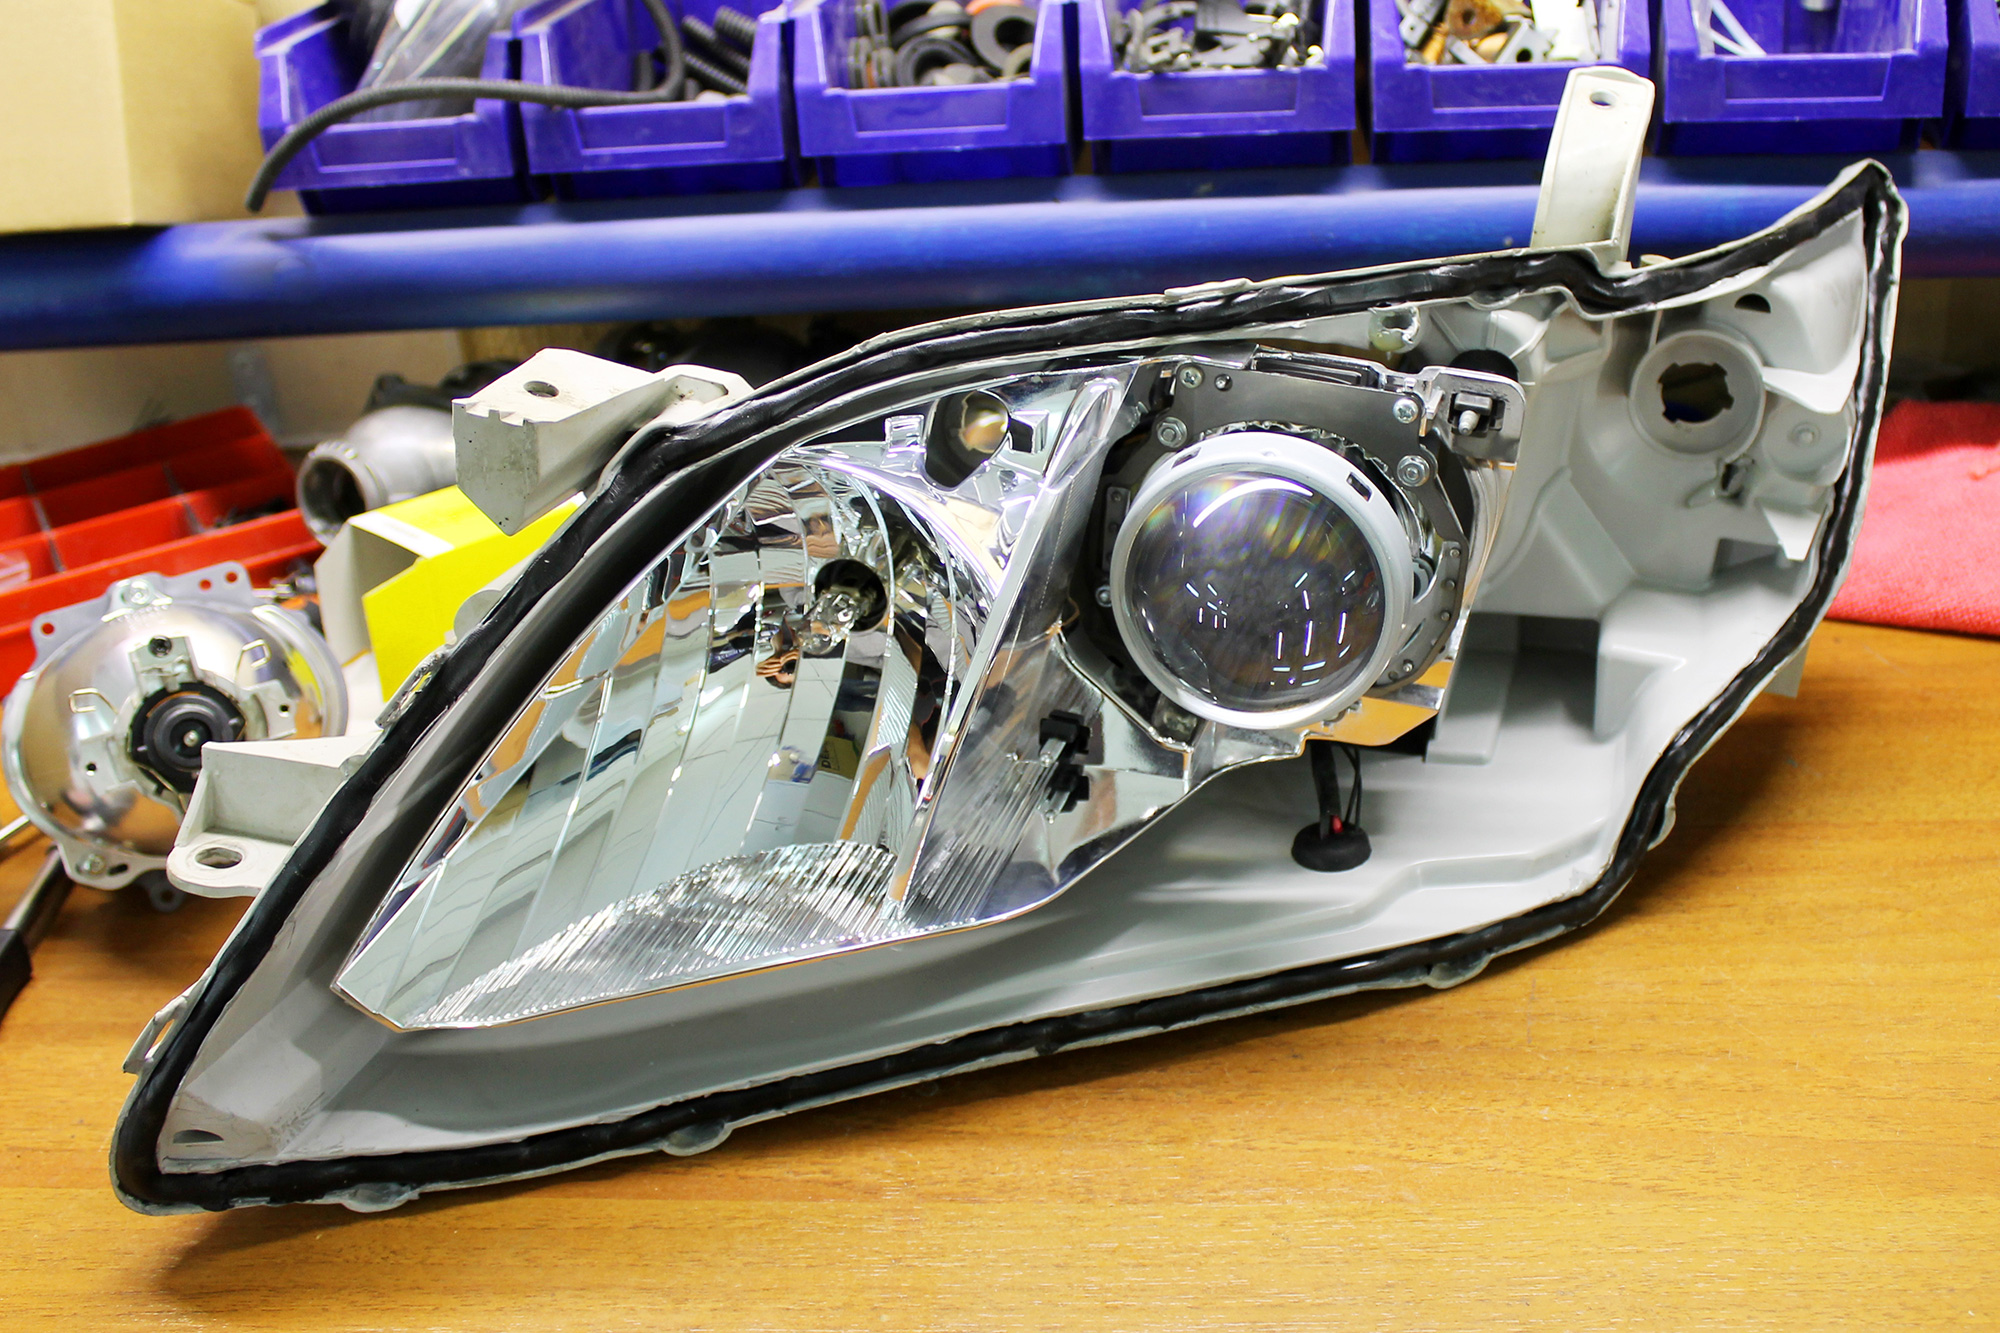 Projector vs. Reflector Headlights: What's the Difference?